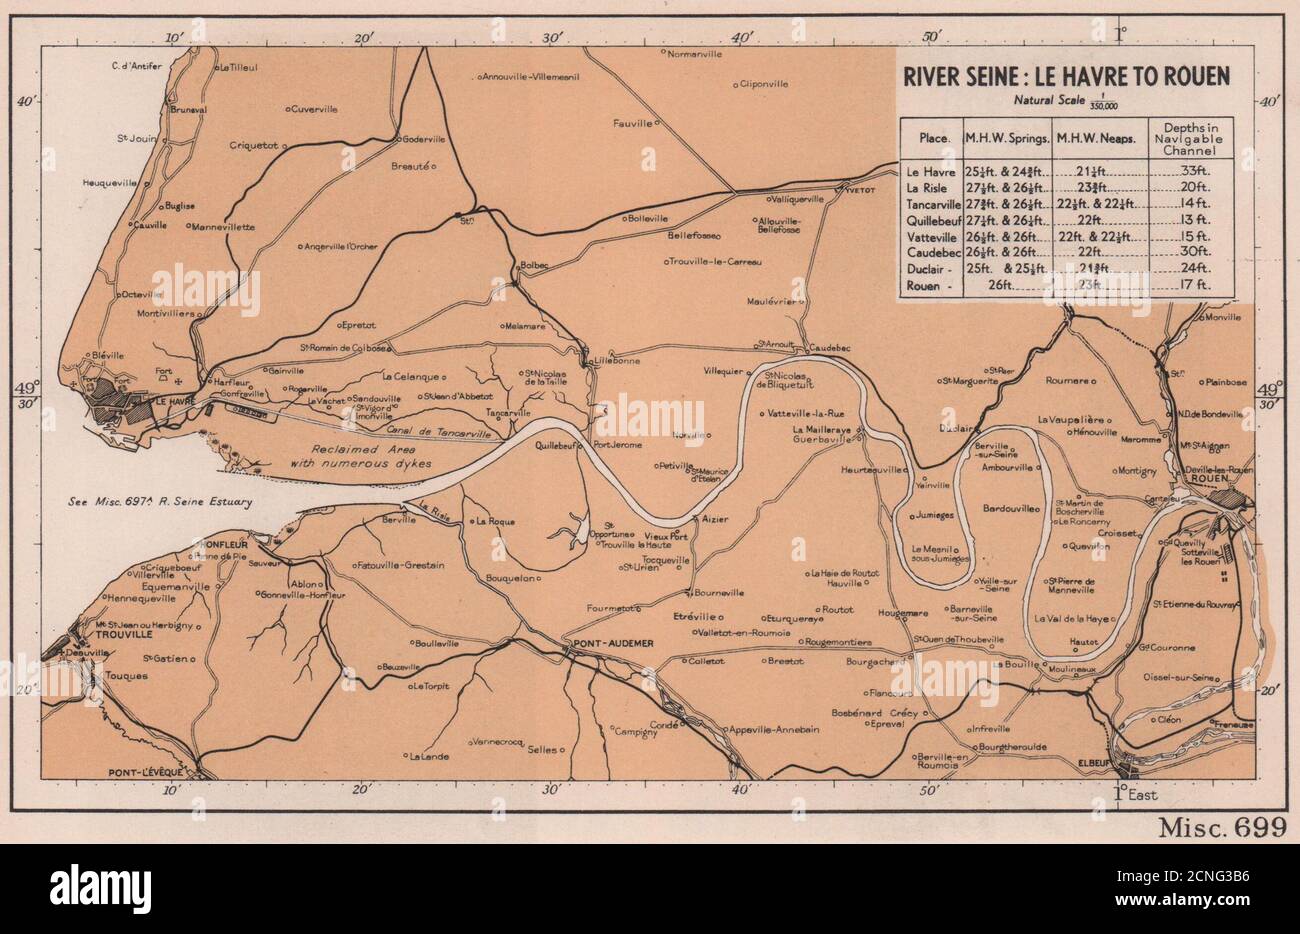 River Seine coast chart. Le Havre to Rouen. D-Day planning map. ADMIRALTY 1943 Stock Photo